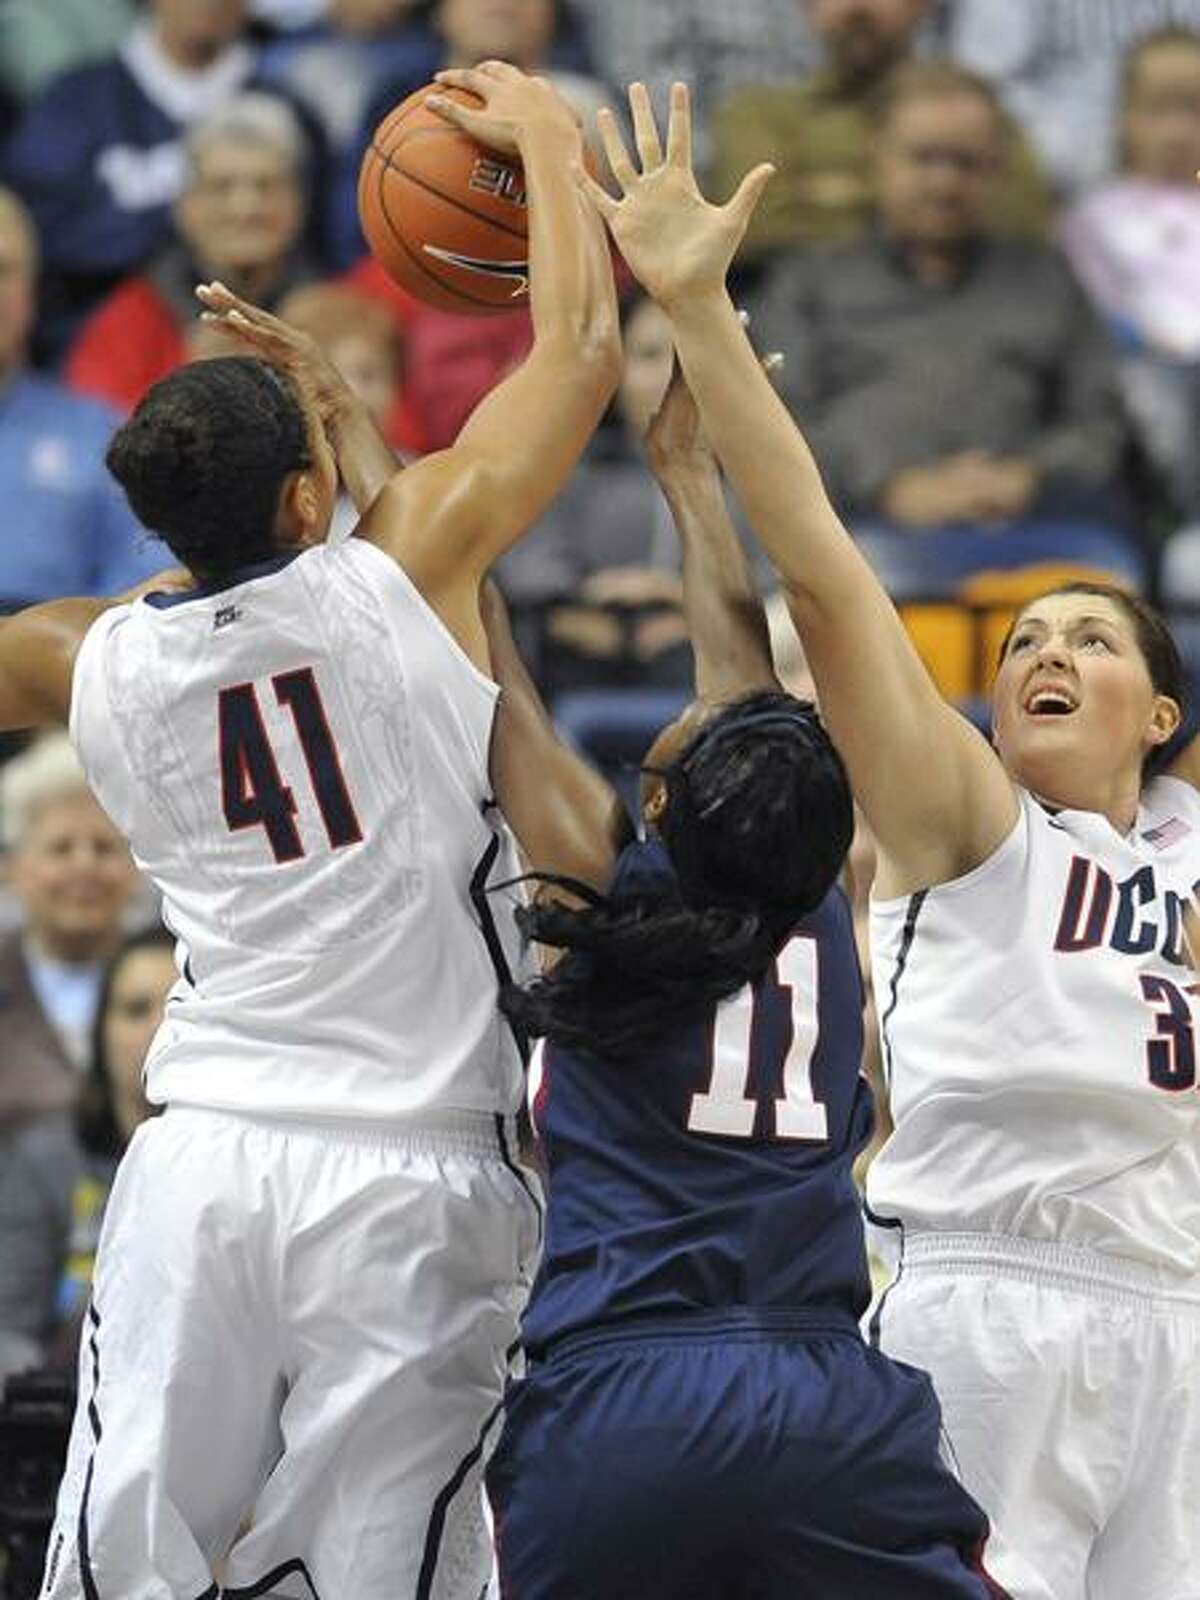 Connecticut's Kiah Stokes (41) blocks a shot from Fairleigh Dickinson's Desiree Crawford (11) as Stefanie Dolson, right, defends in the first half of an NCAA college basketball game in Storrs, Conn., Friday, Nov. 25, 2011. (AP Photo/Jessica Hill)